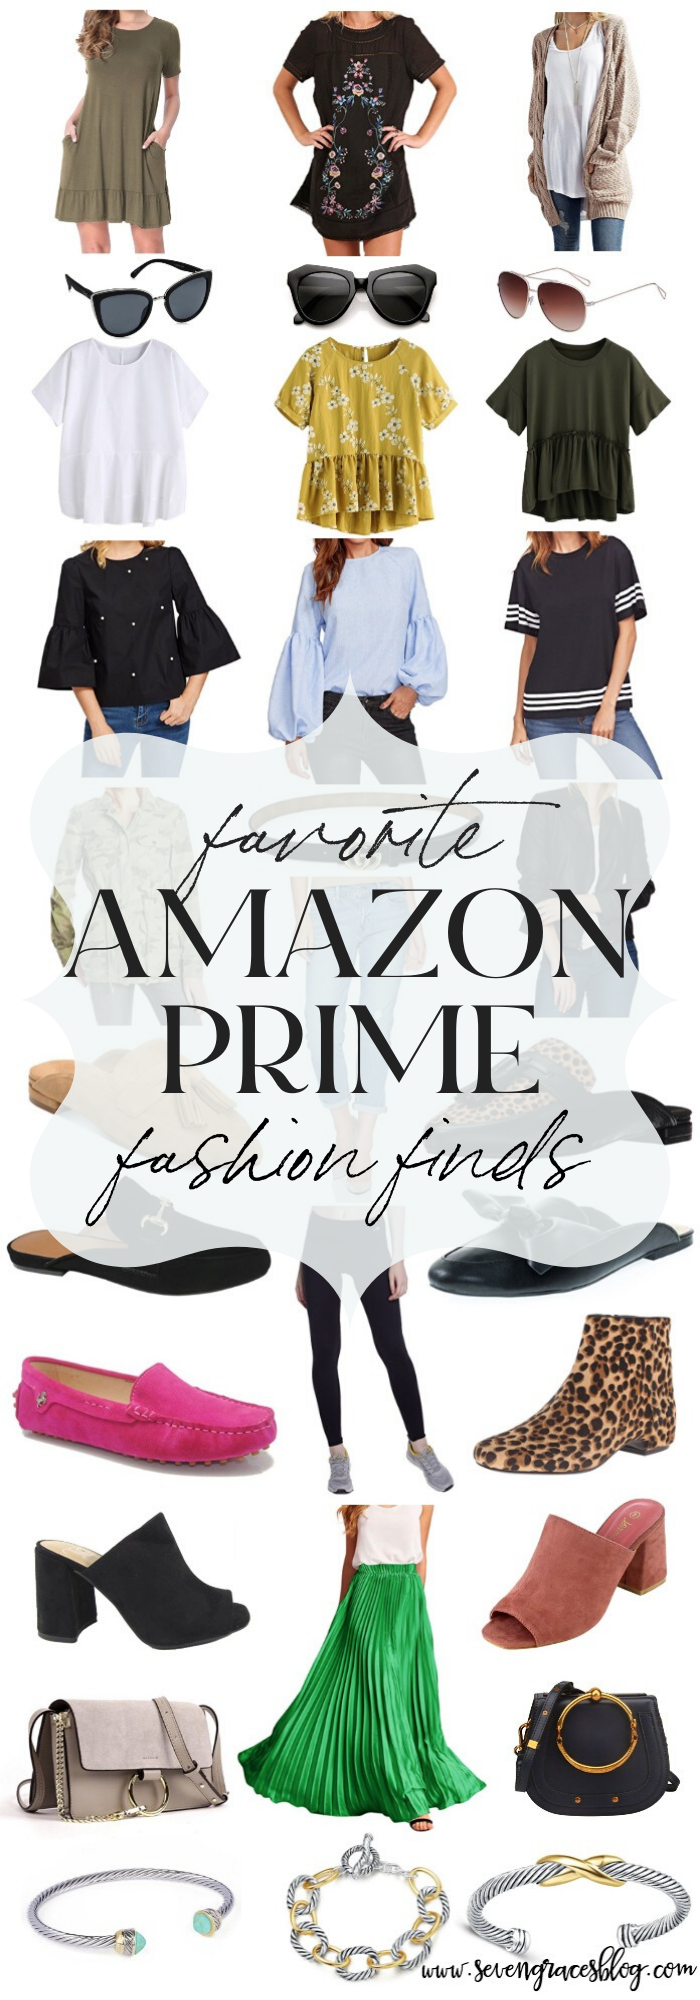 The ultimate Amazon Prime fashion picks for your closet. The best pieces to add to your closet from Amazon and the best looks for less you can find! You don't want to miss this!